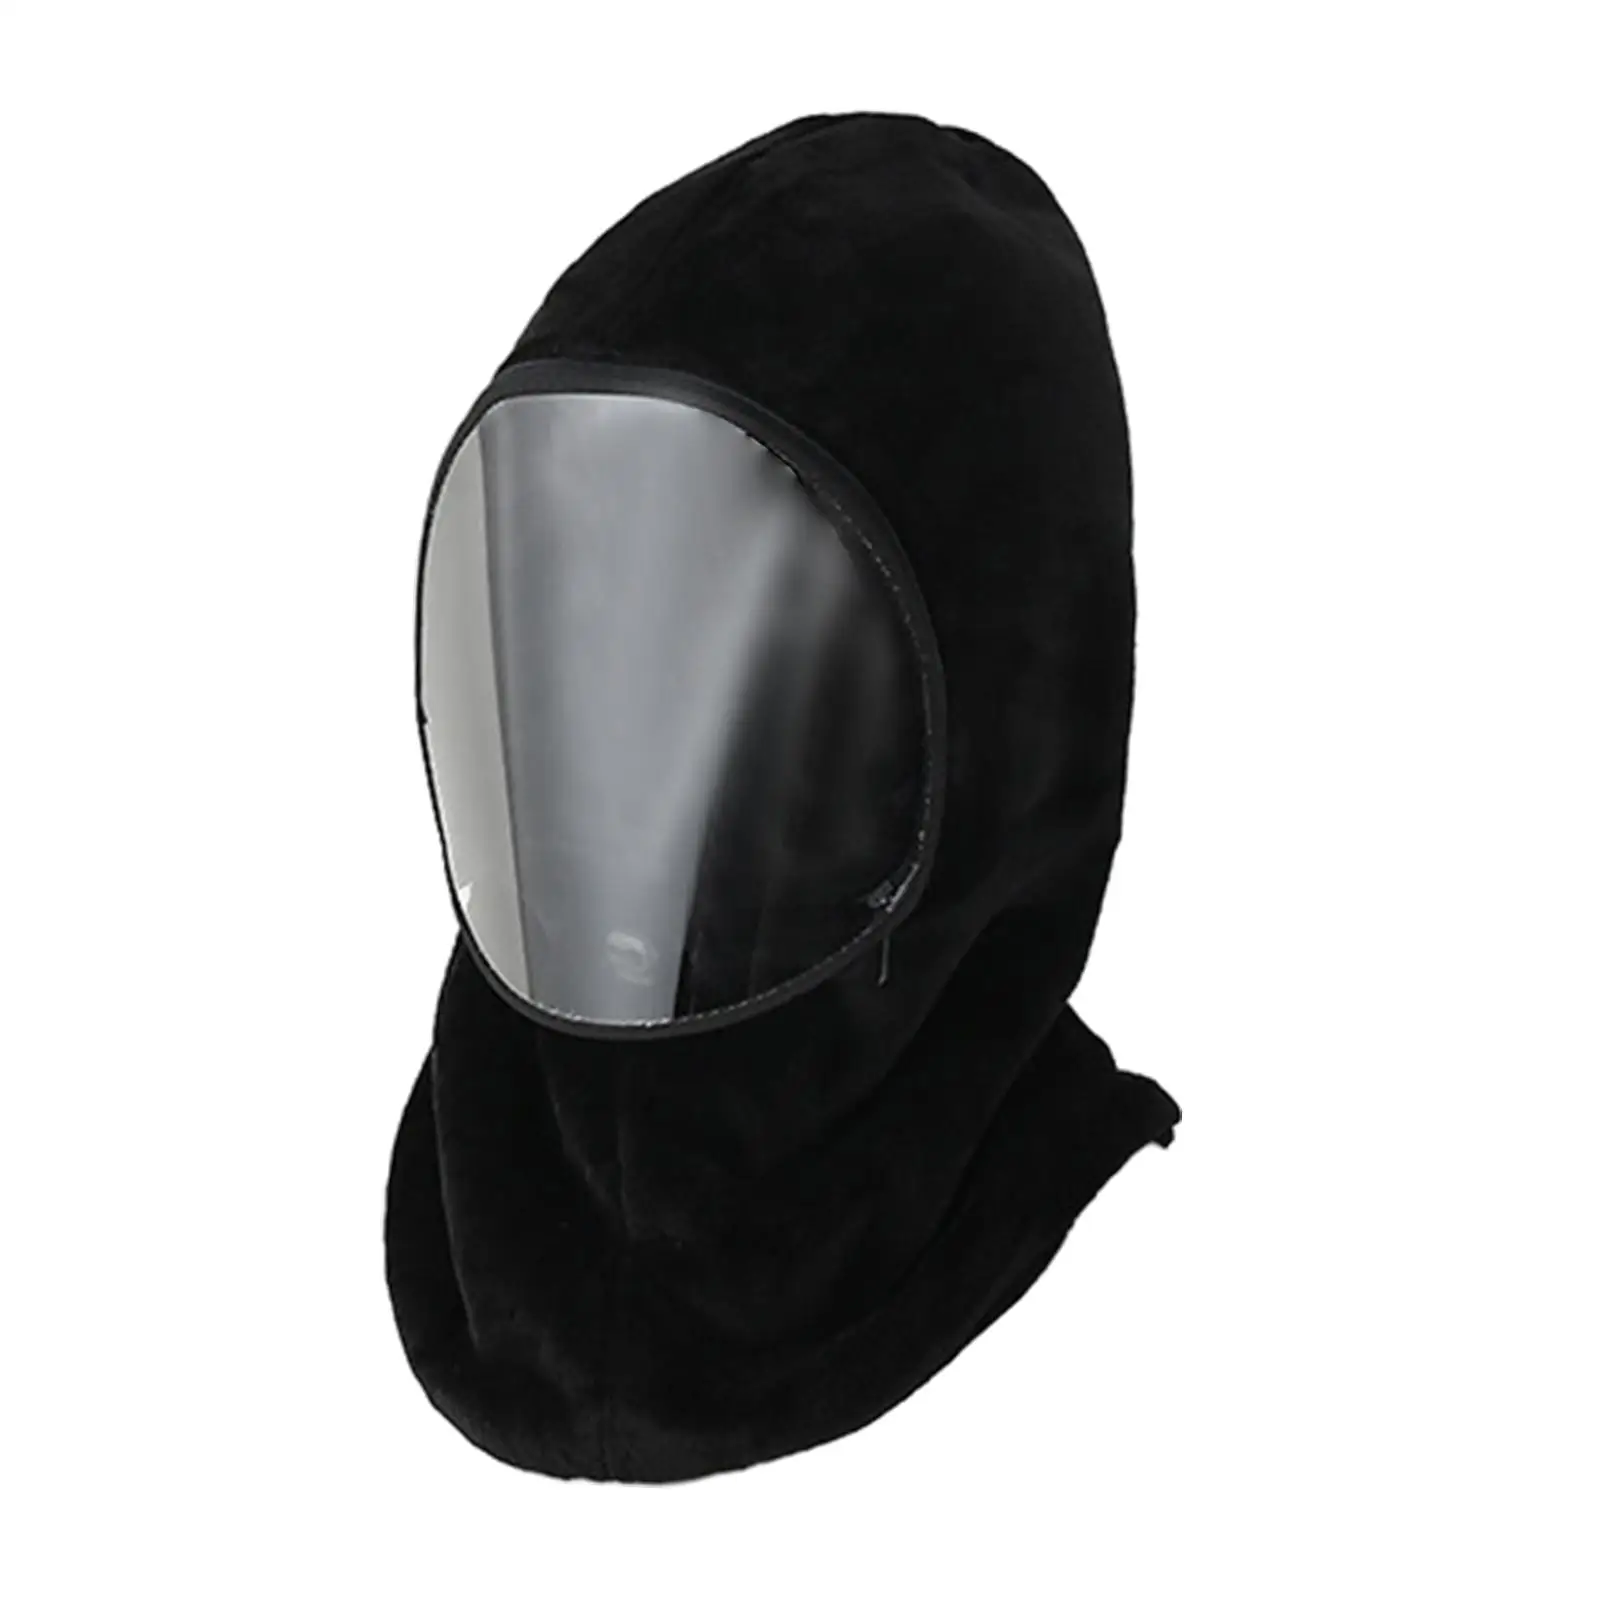 Balaclava Ski Hood Removable Face Cover Windproof Neck Warmer Winter Hat Winter Cap for Riding Motorcycle Outdoor Sports Ski